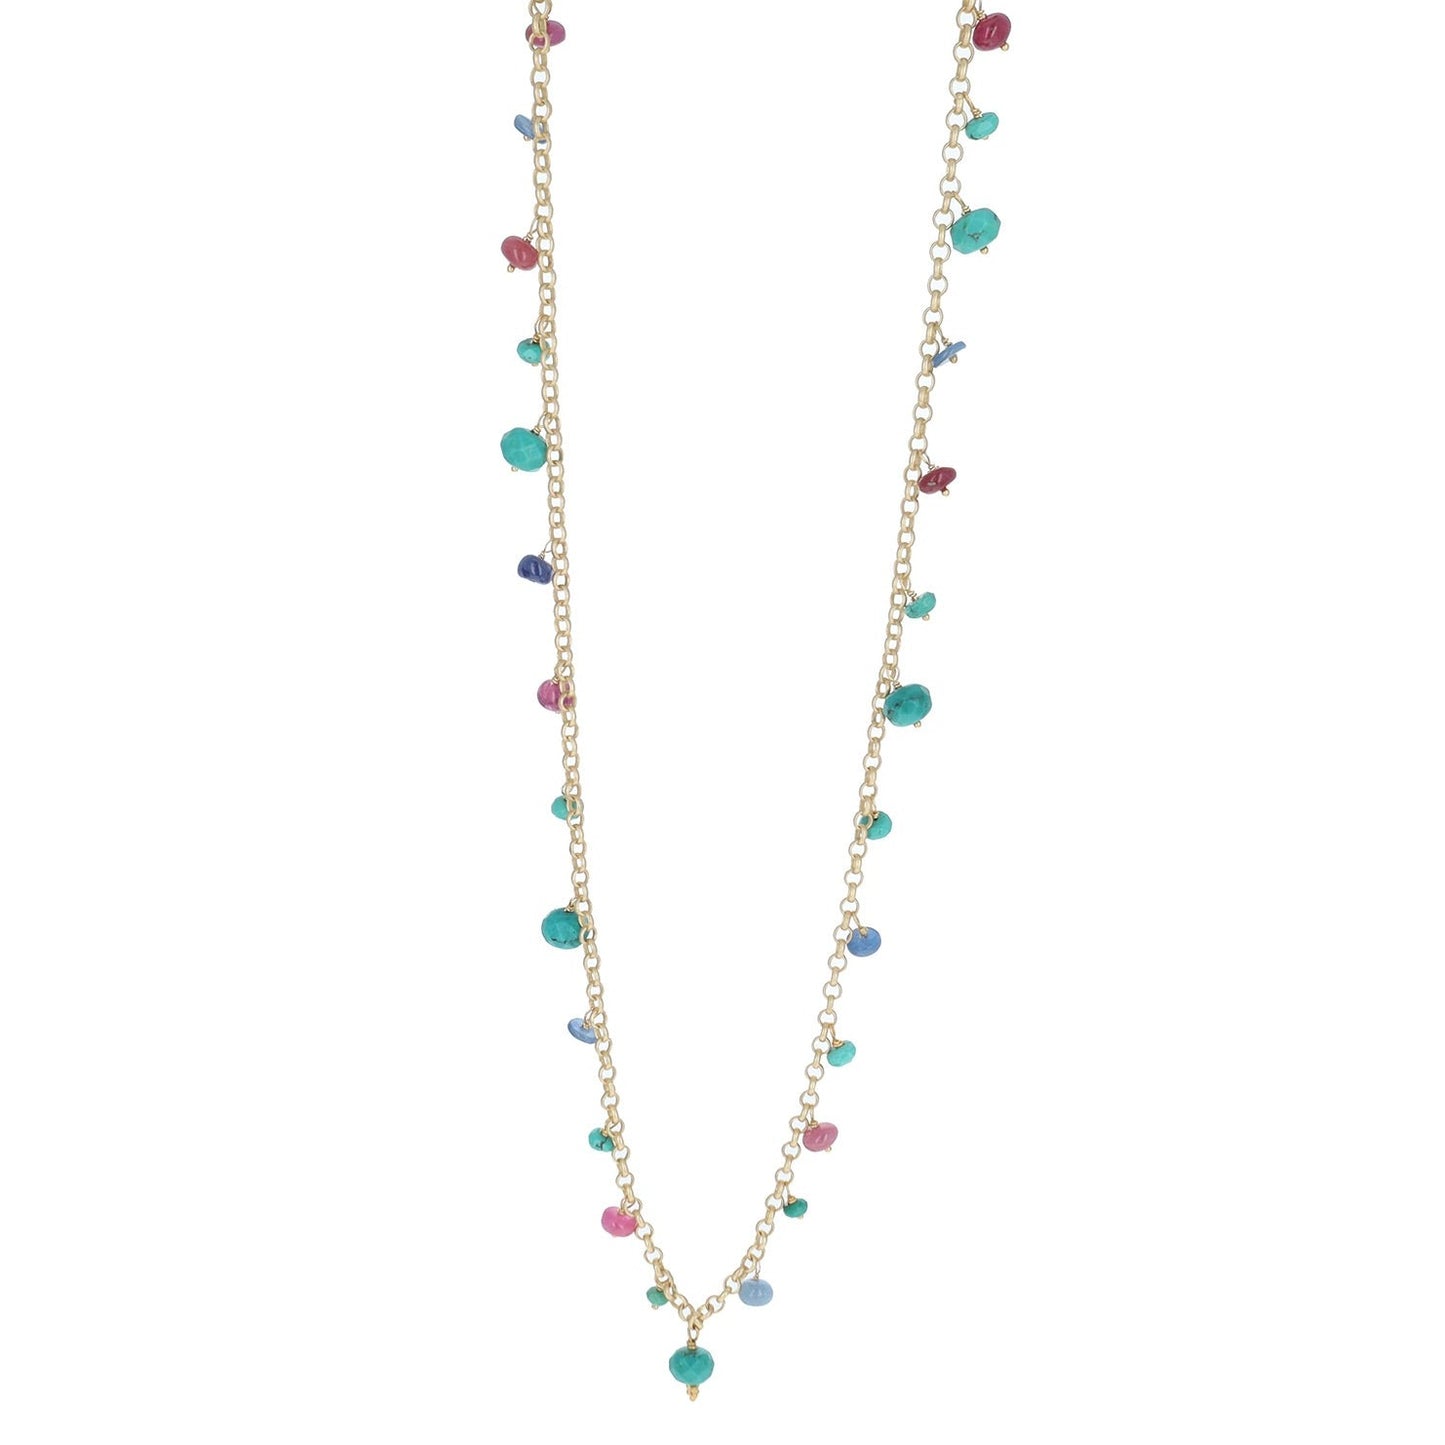 Satin Gold Chain with drop sapphires and turquoise